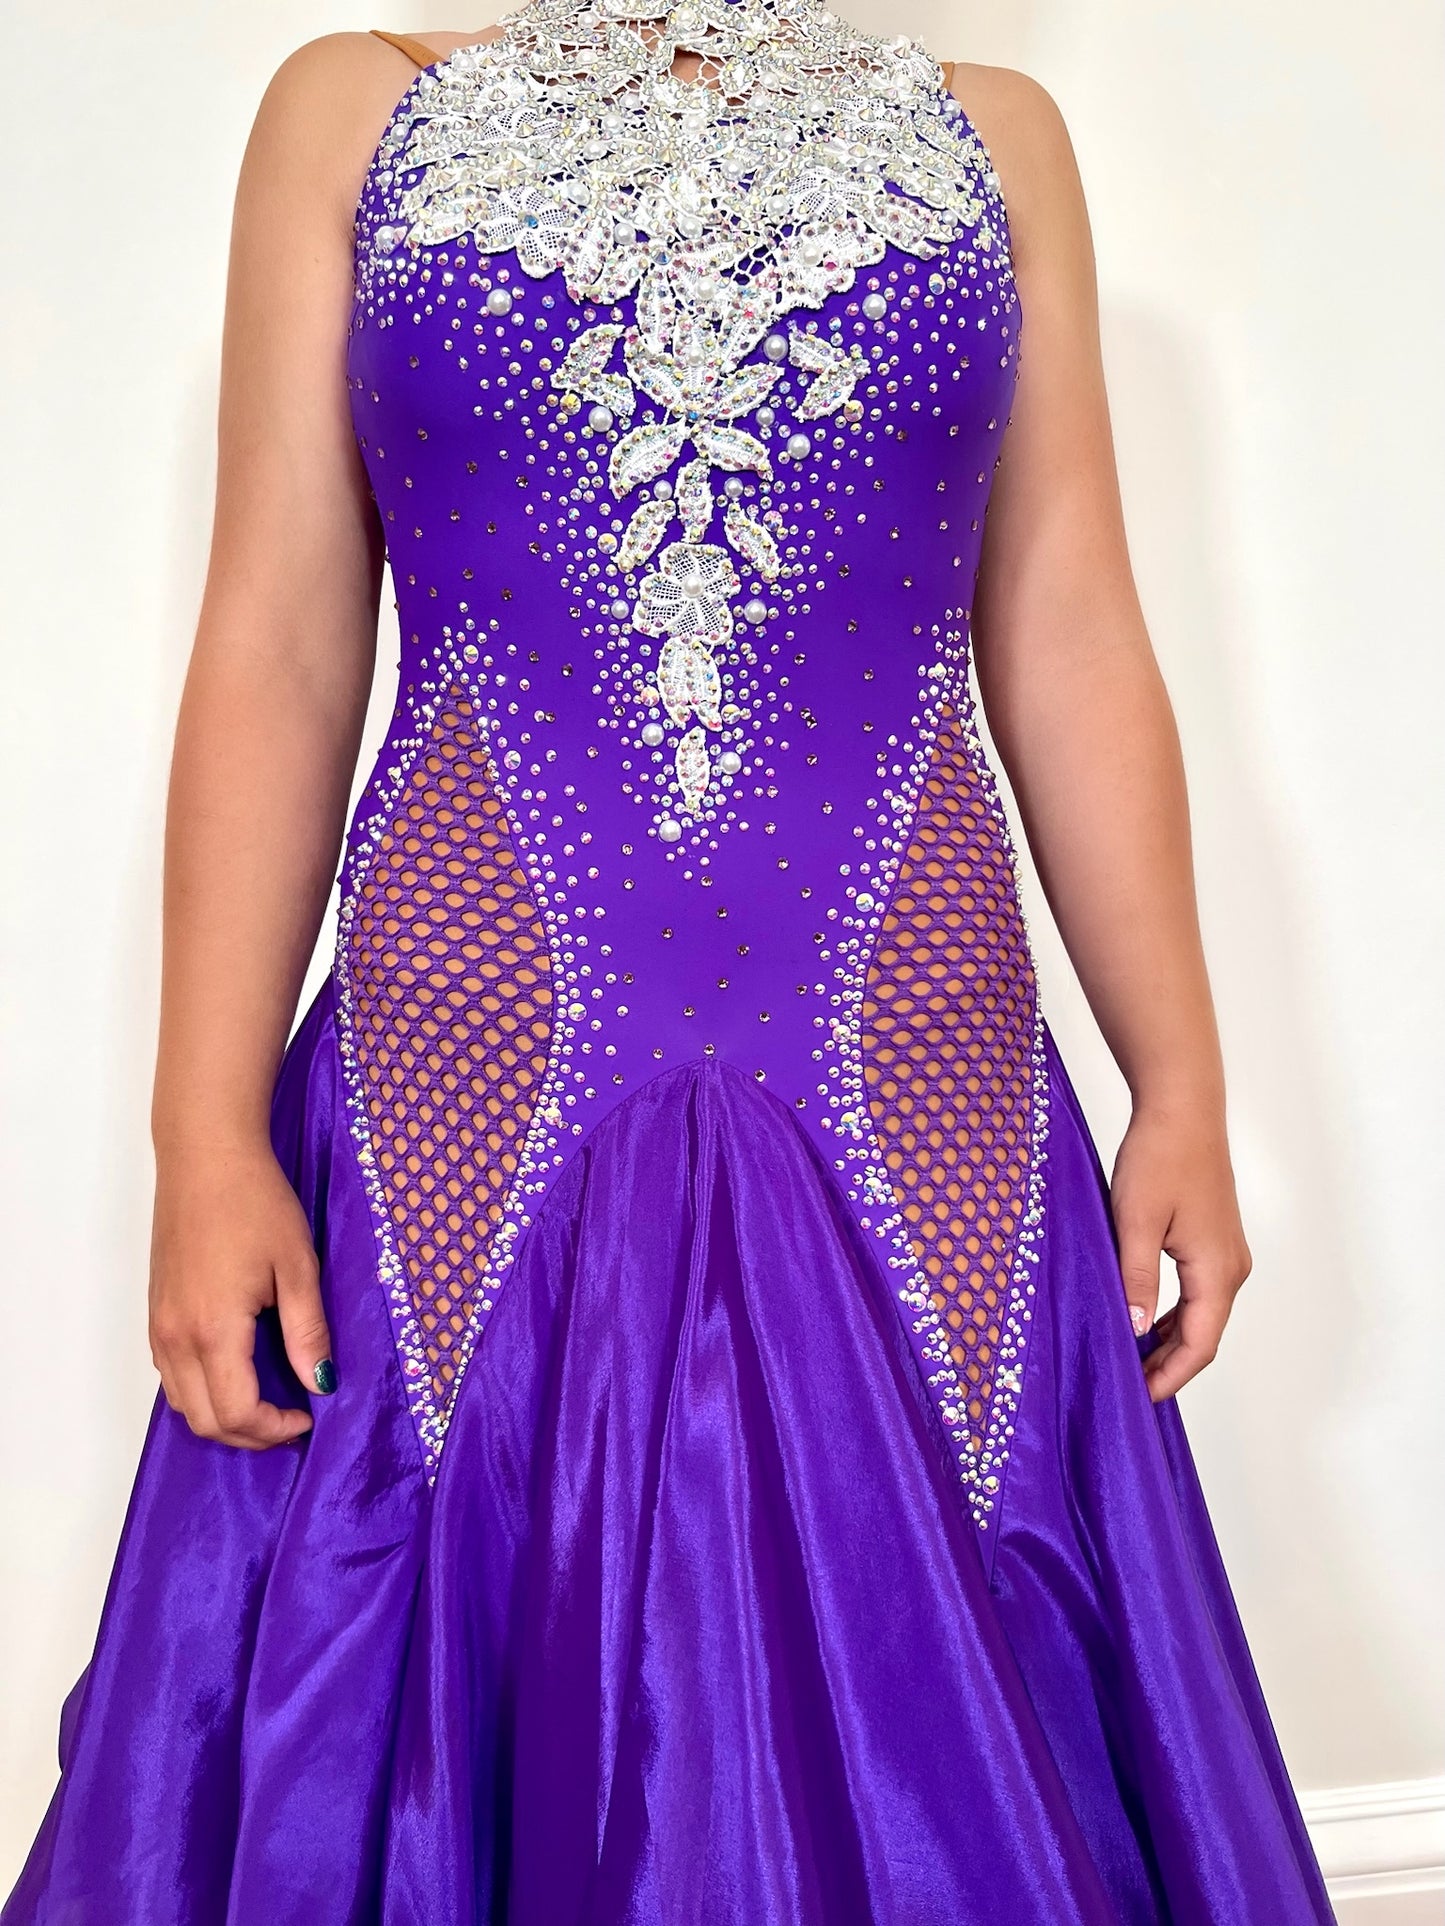 056 Purple Halter Neck Ballroom Dress. White lace detail to front and back bodice. Purple fishnet panel to the front. Decorated in purple & AB stones. Underskirts in White with exposed satin skirts to one side